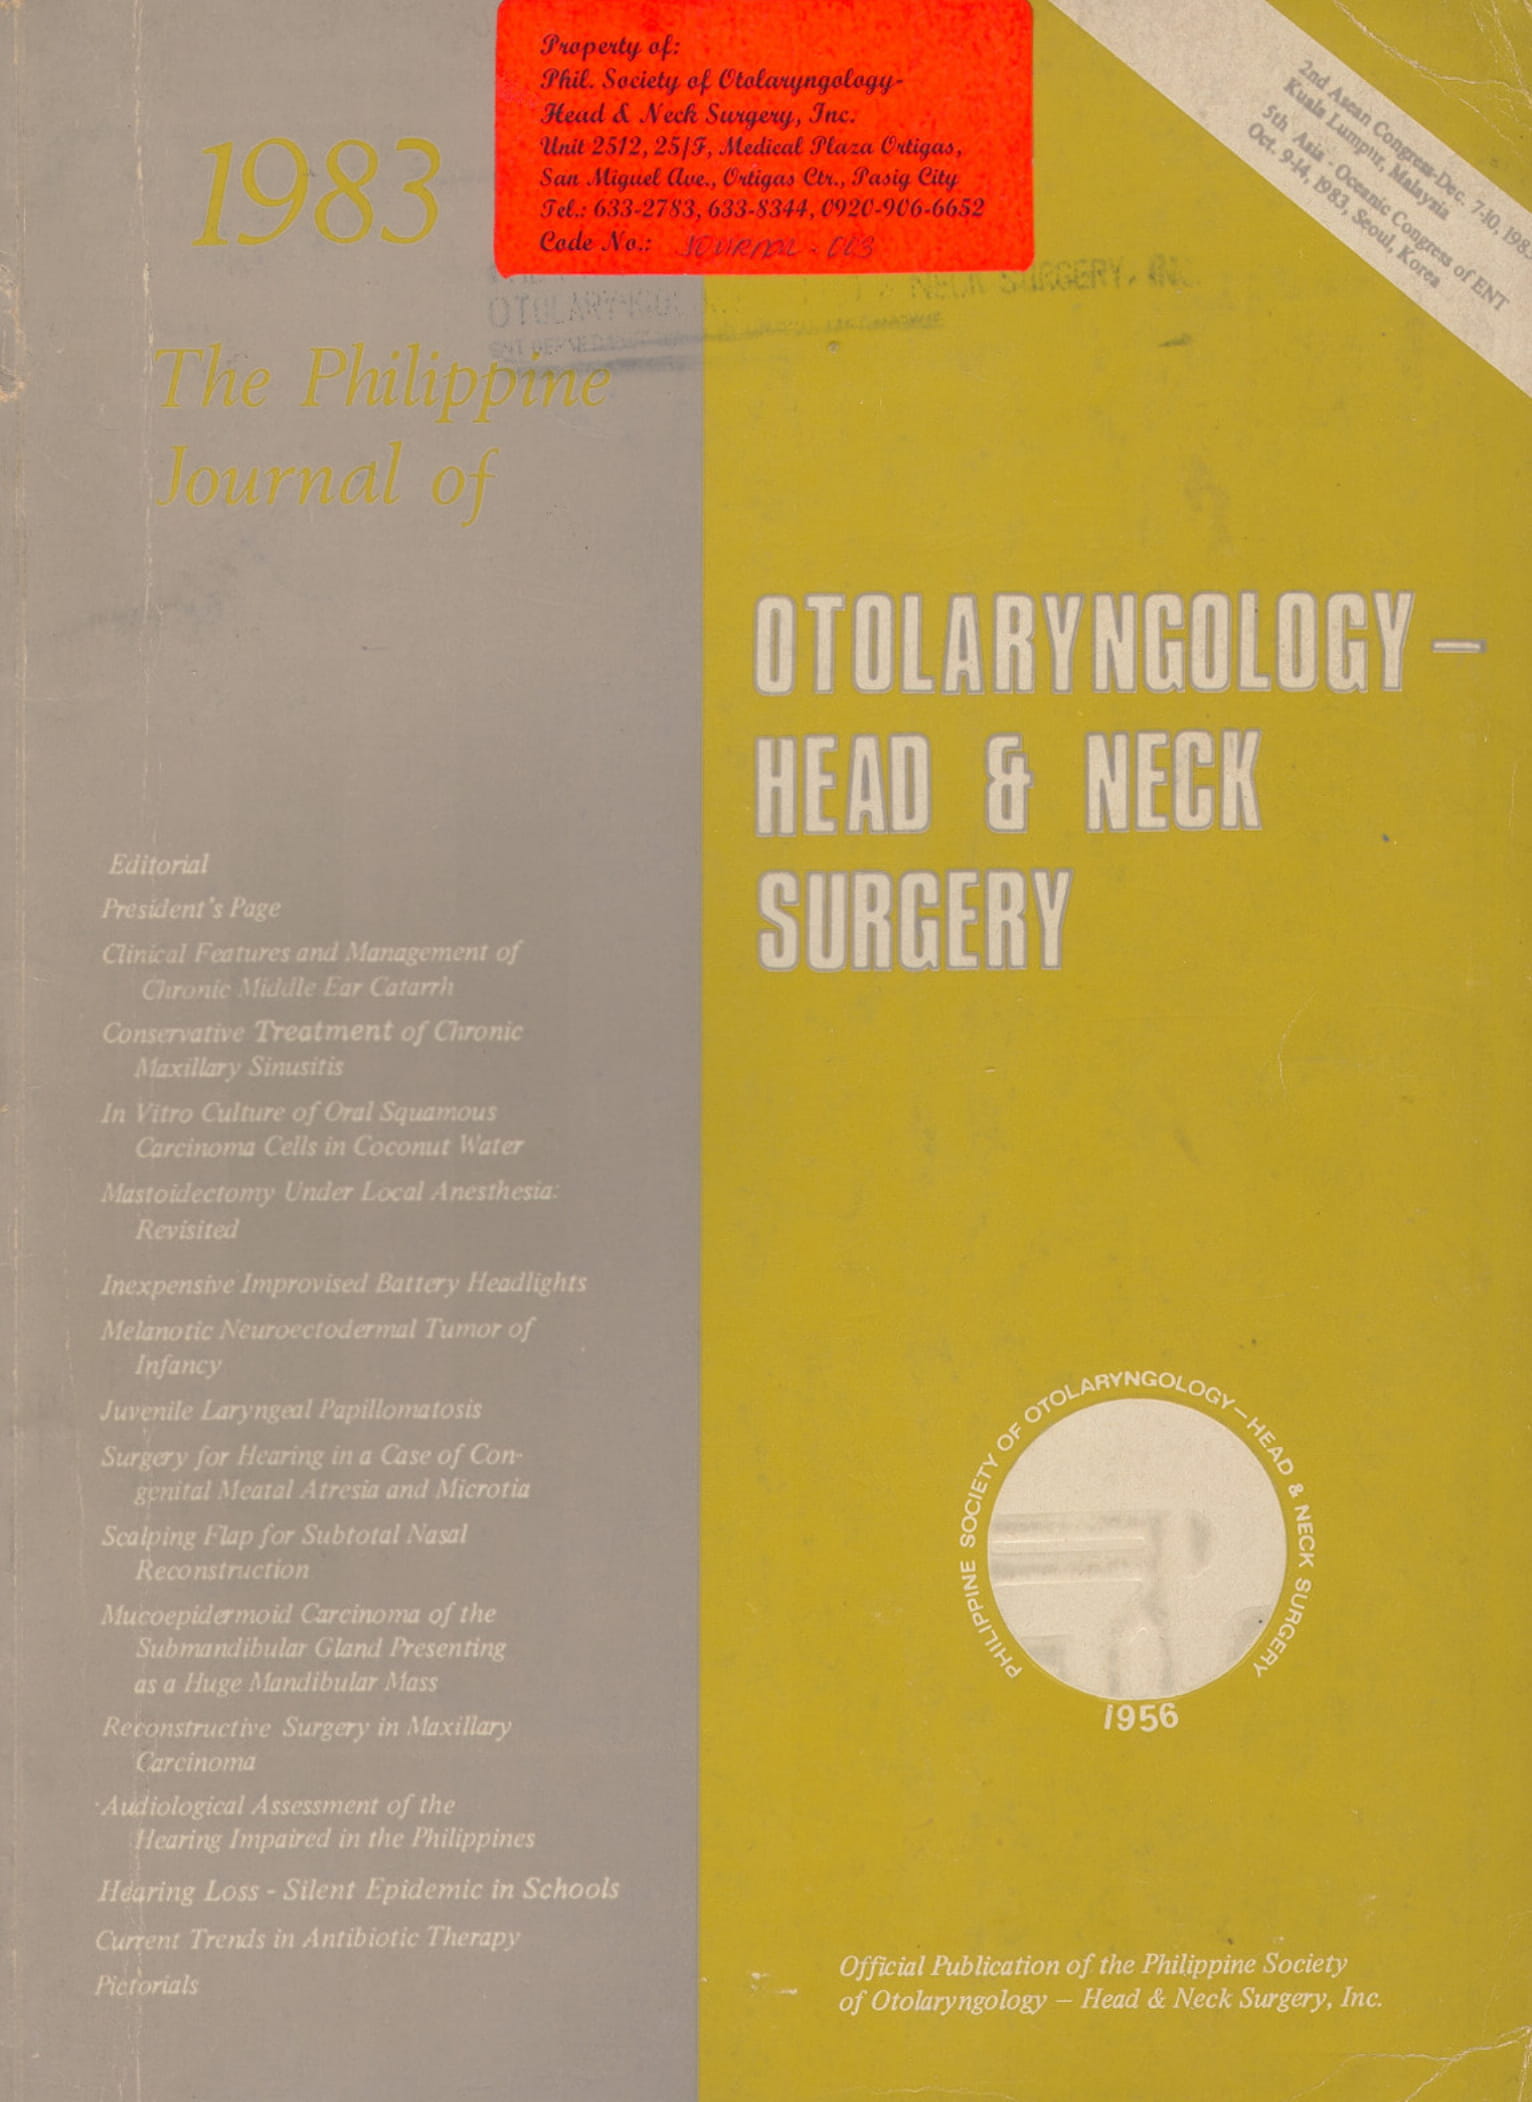 					View 1983: Philippine Journal of Otolaryngology-Head and Neck Surgery
				